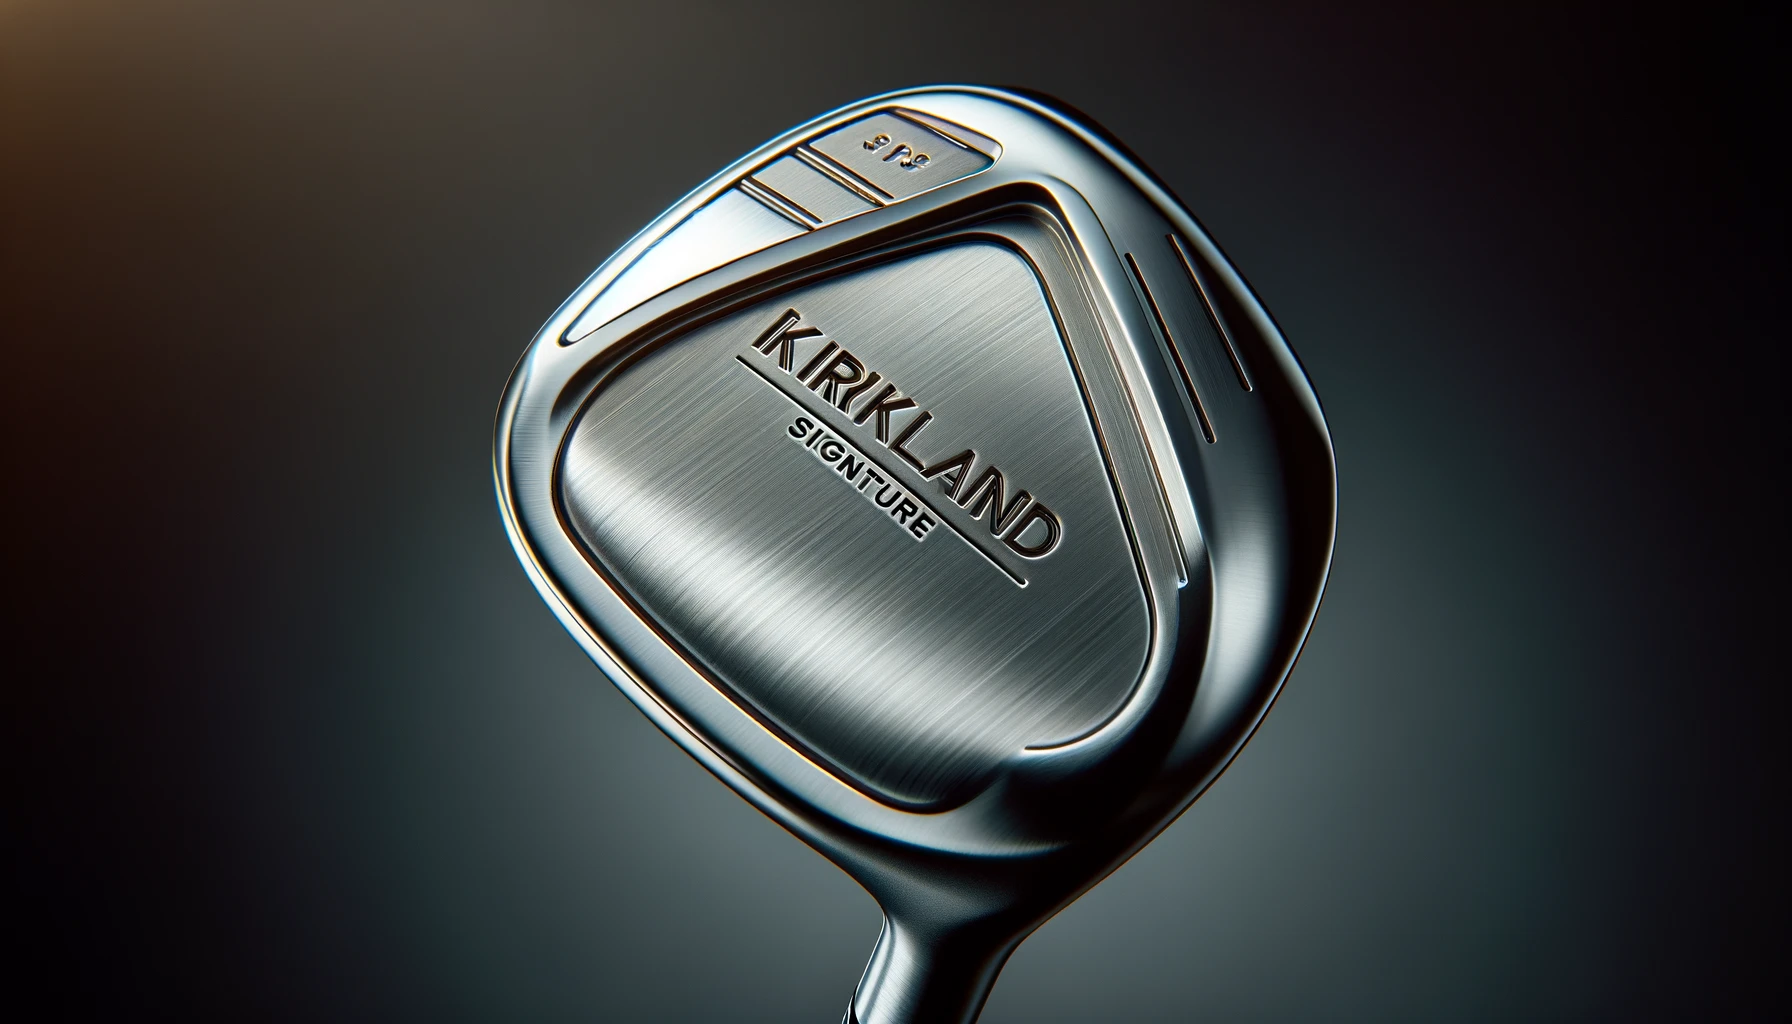 Costco Kirkland Golf Clubs Irons Reviews and price